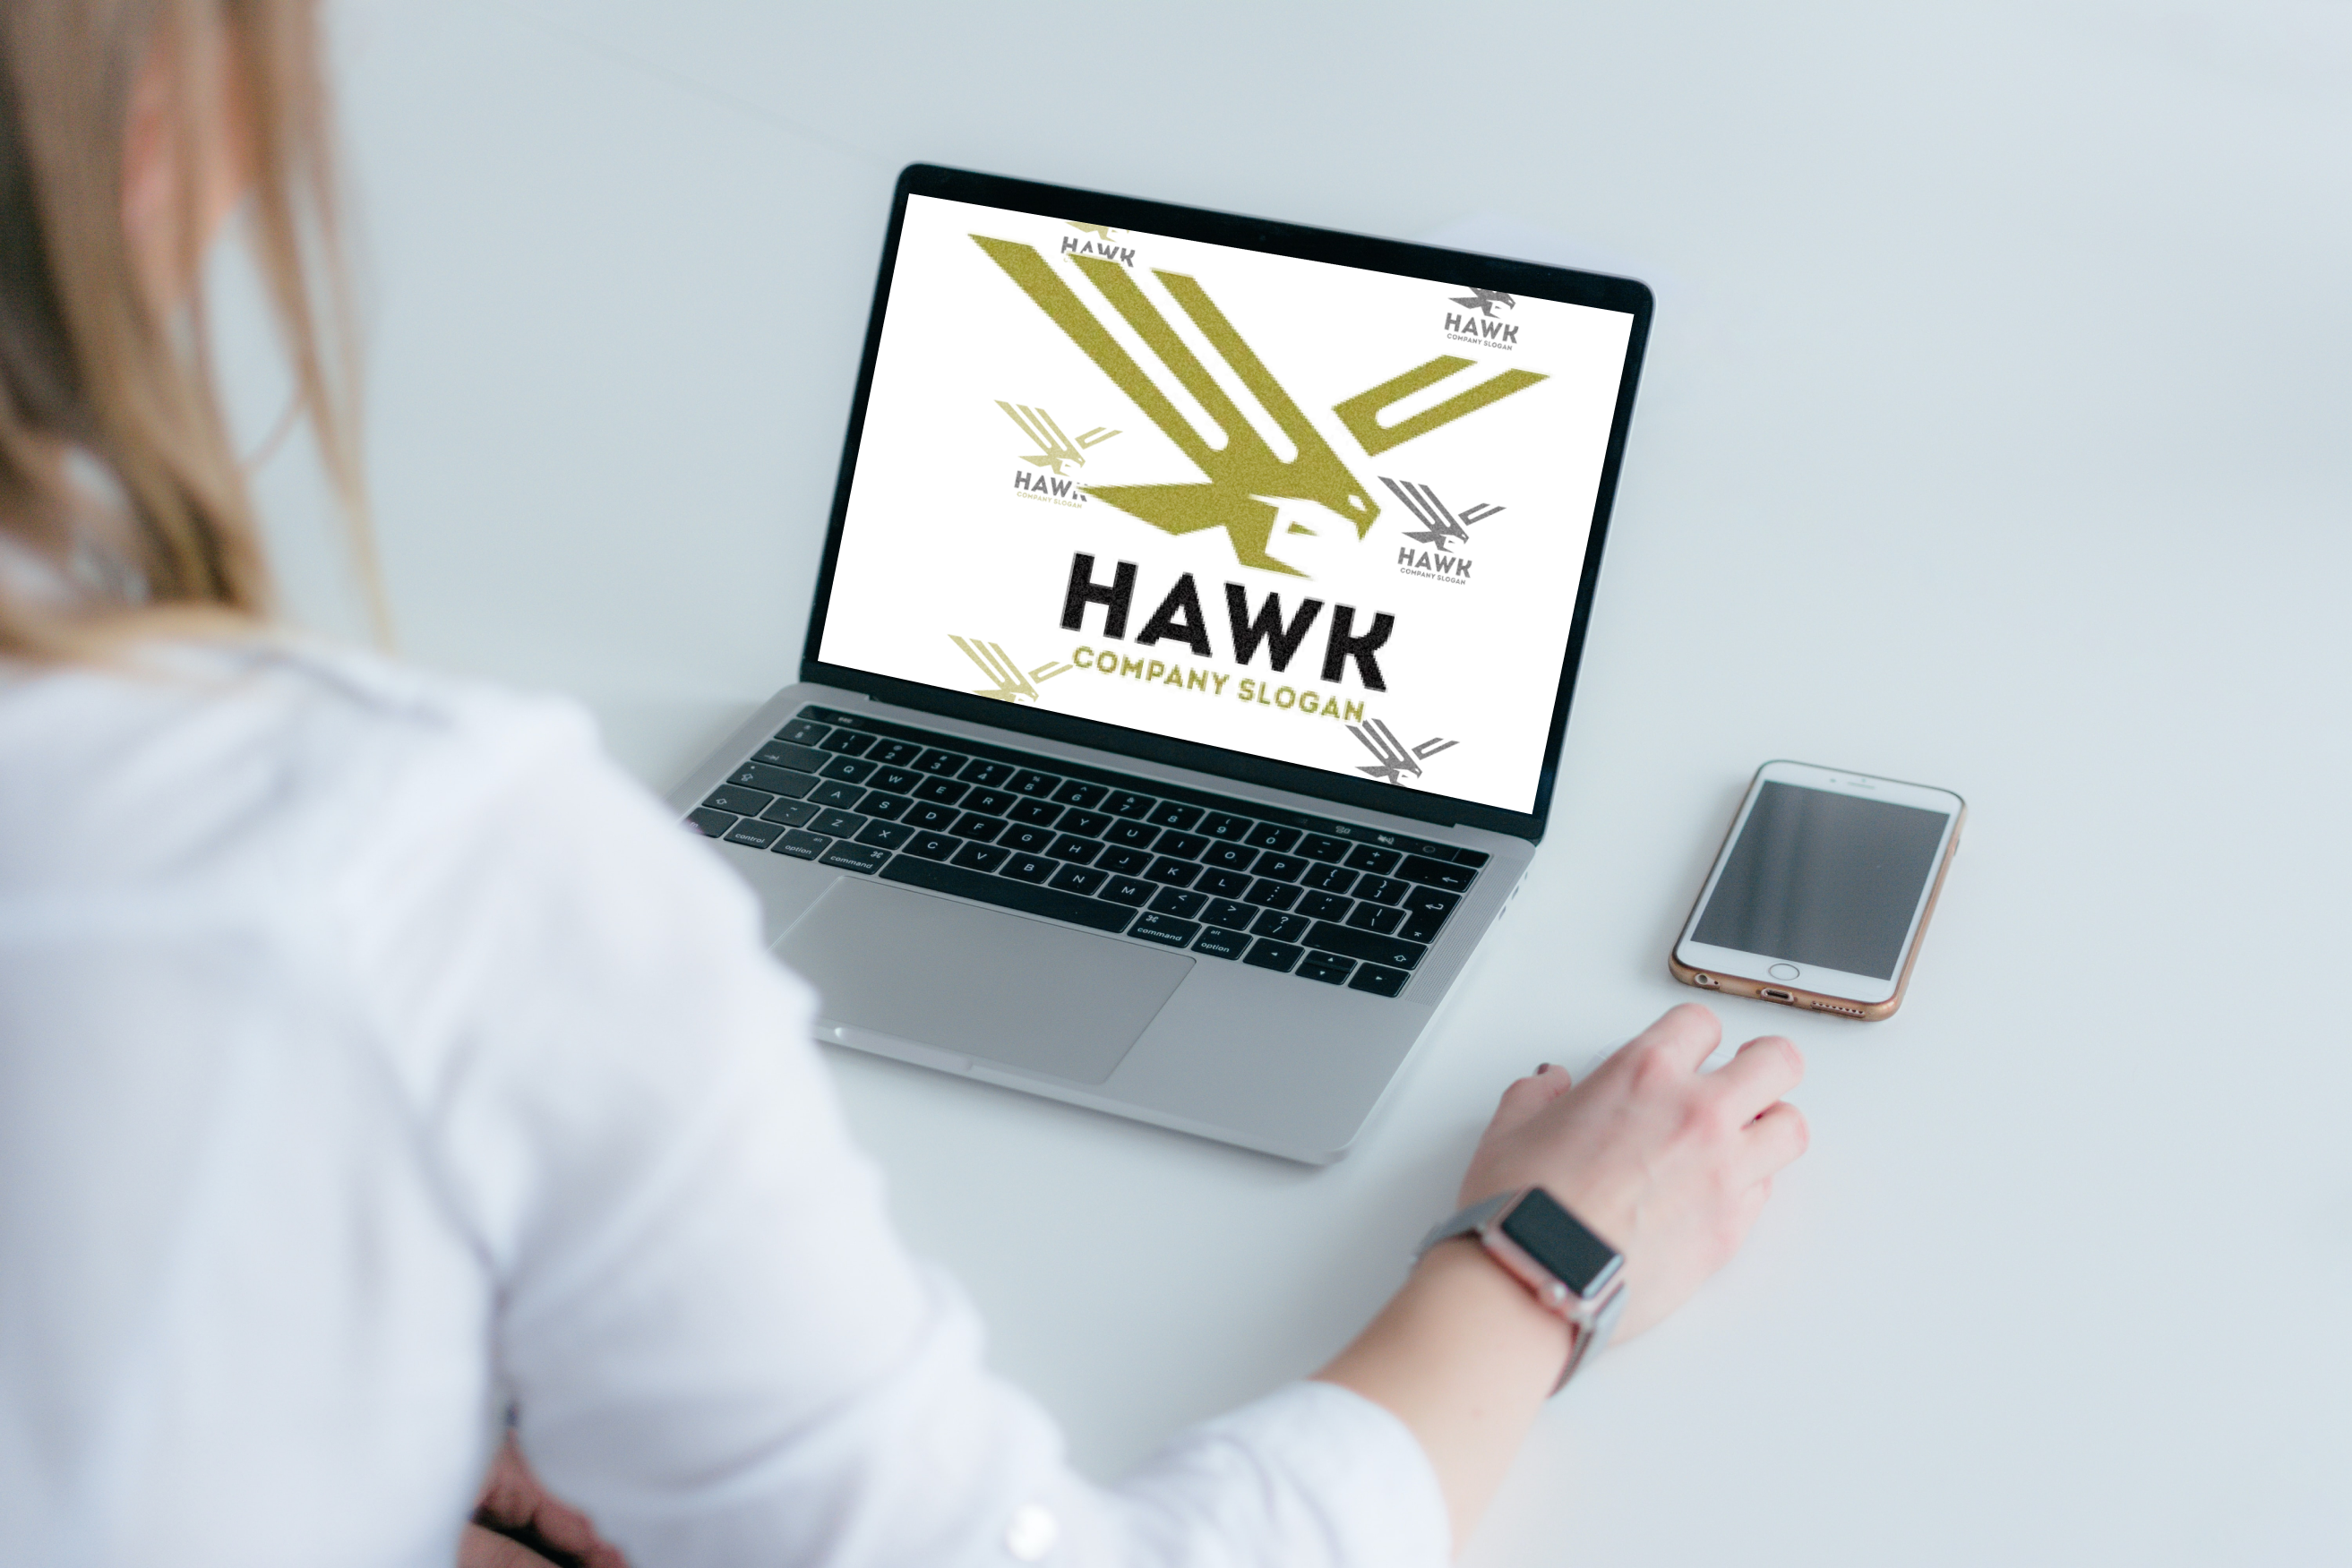 Wing hawk concept design on computer.